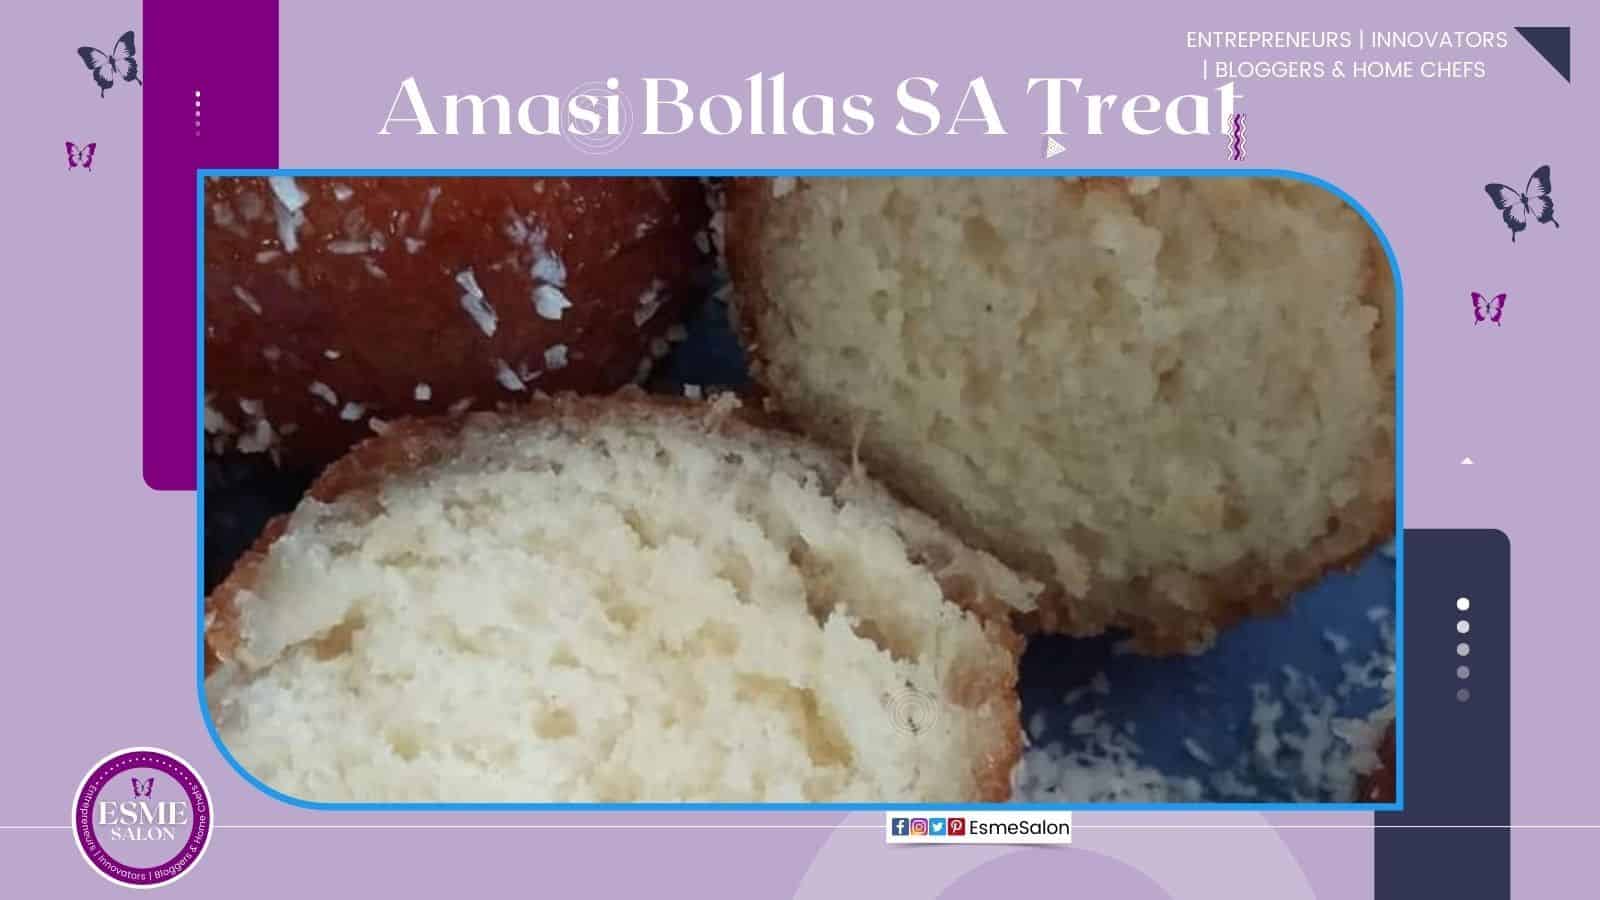 Amasi Bollas, a traditional South African Sweet treat dunked in a sweet syrup and covered in coconut